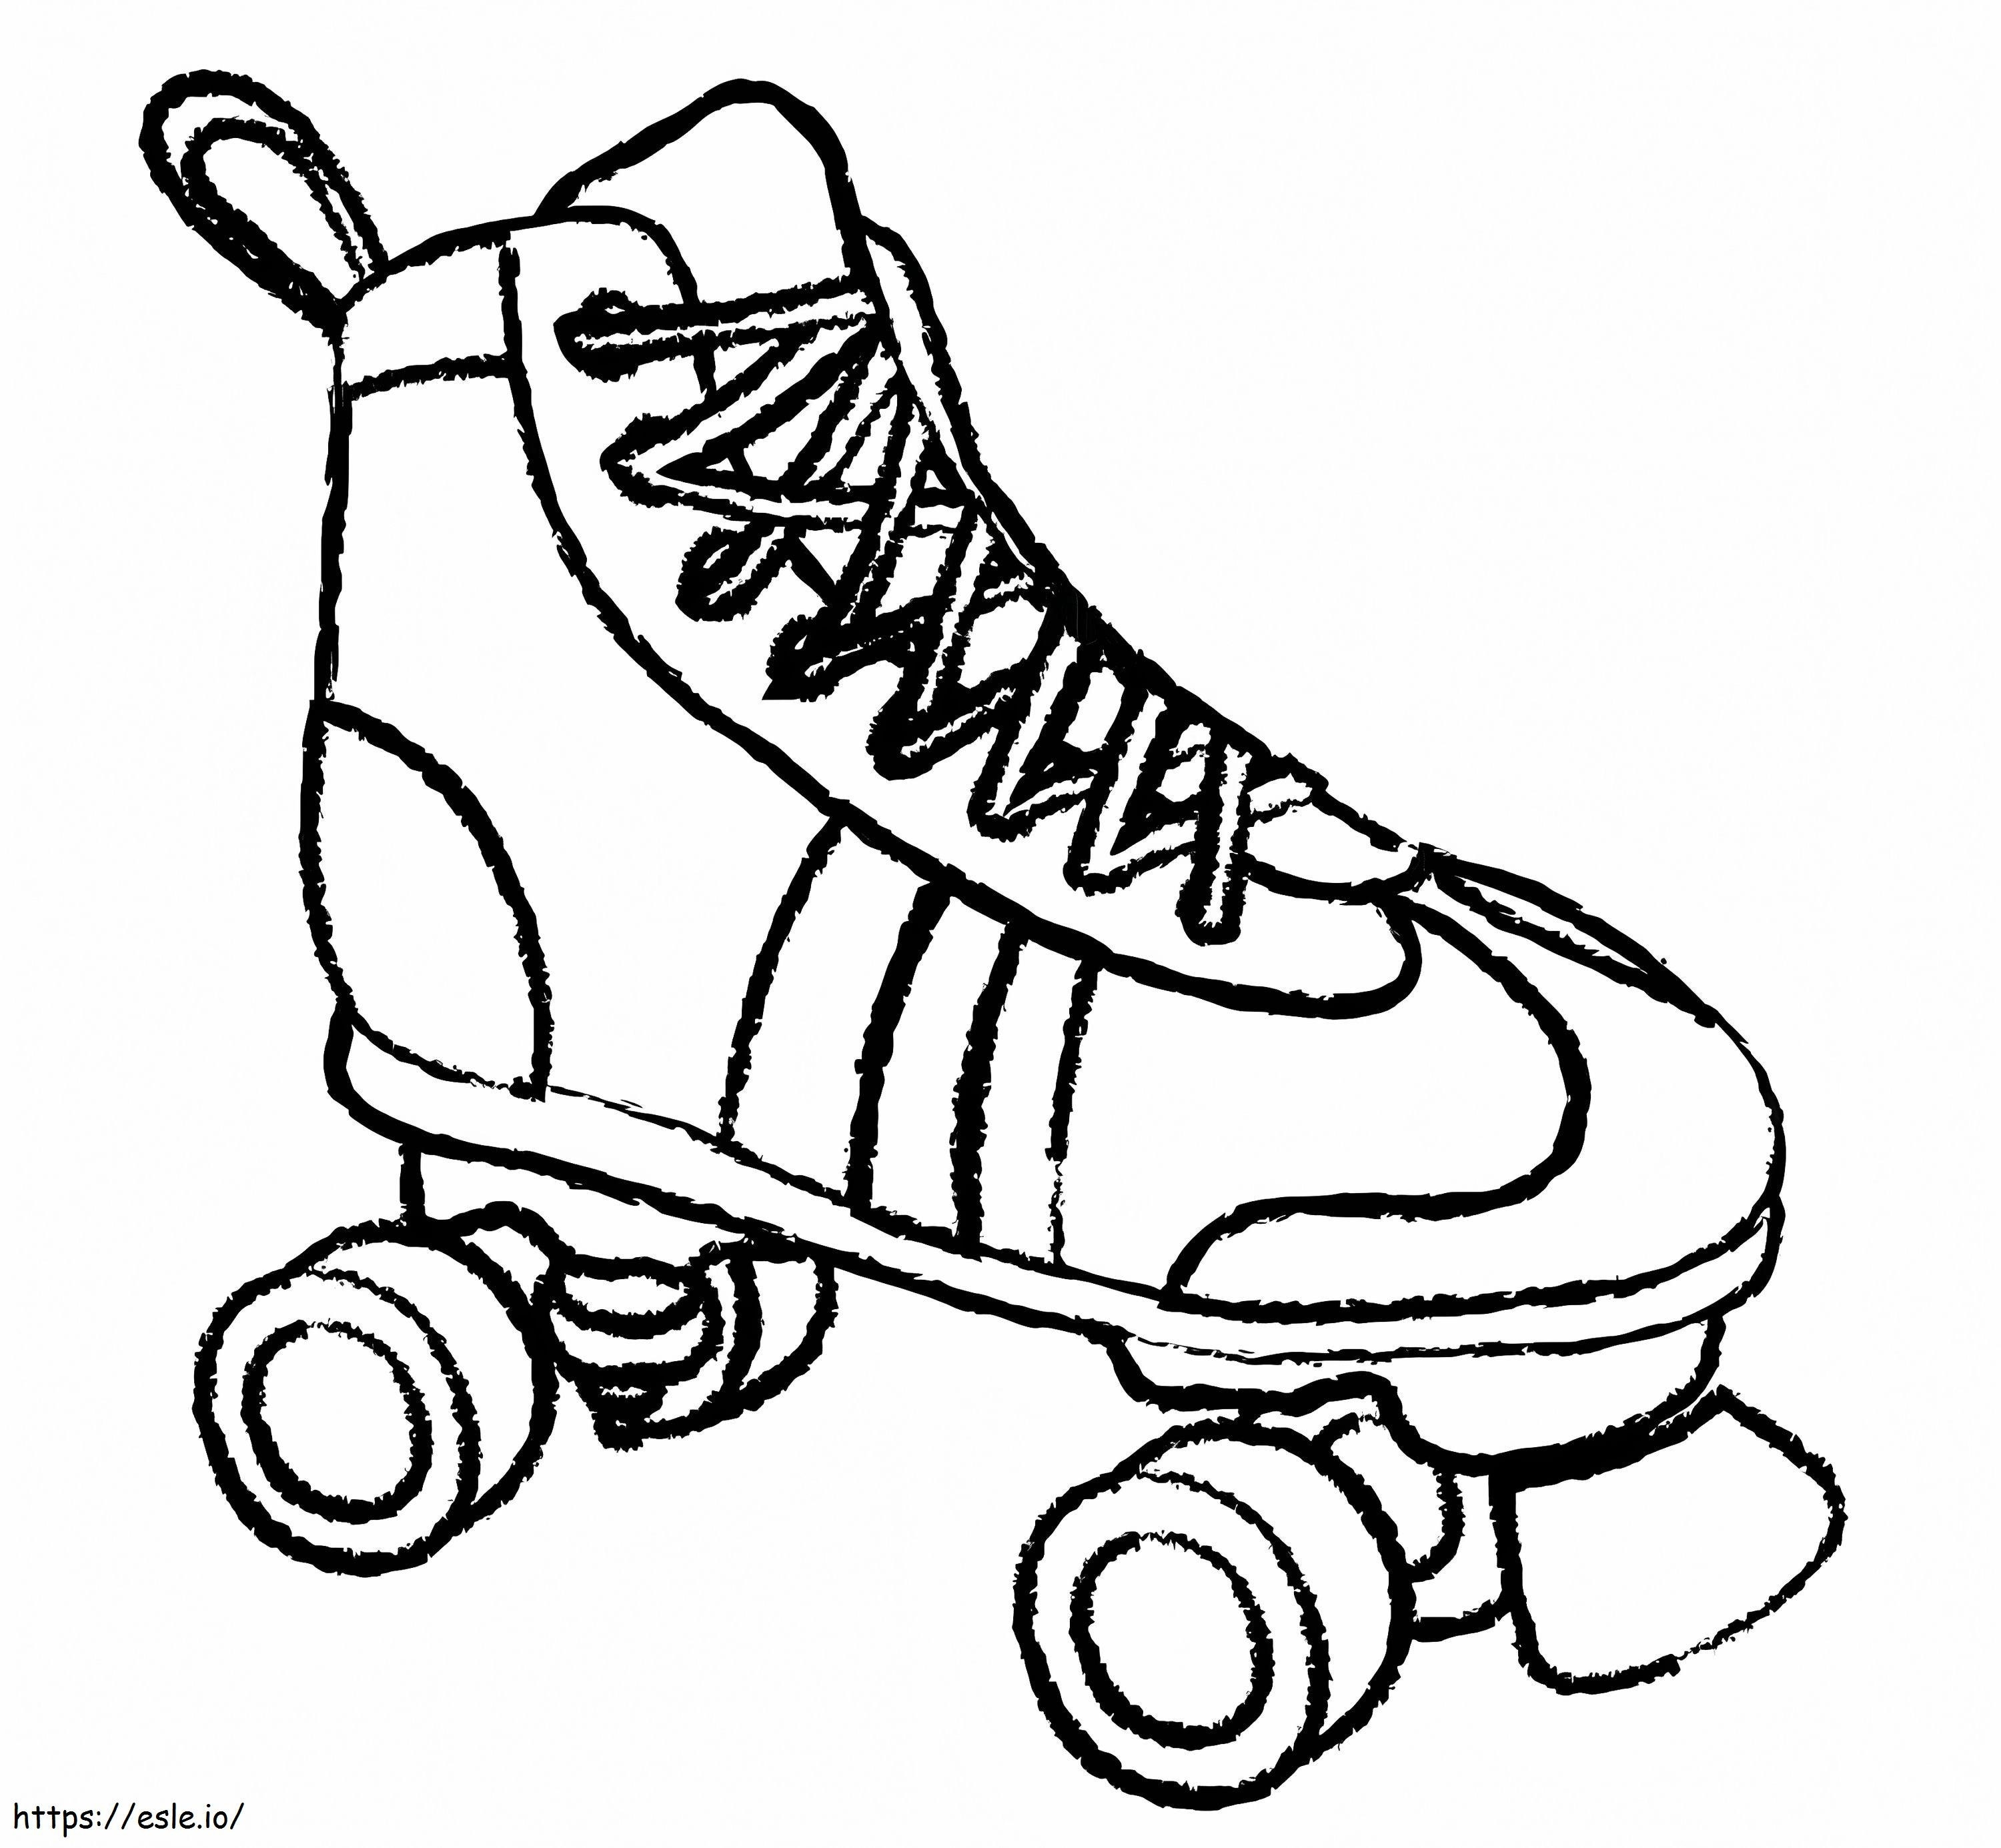 Roller Skate Printable coloring page